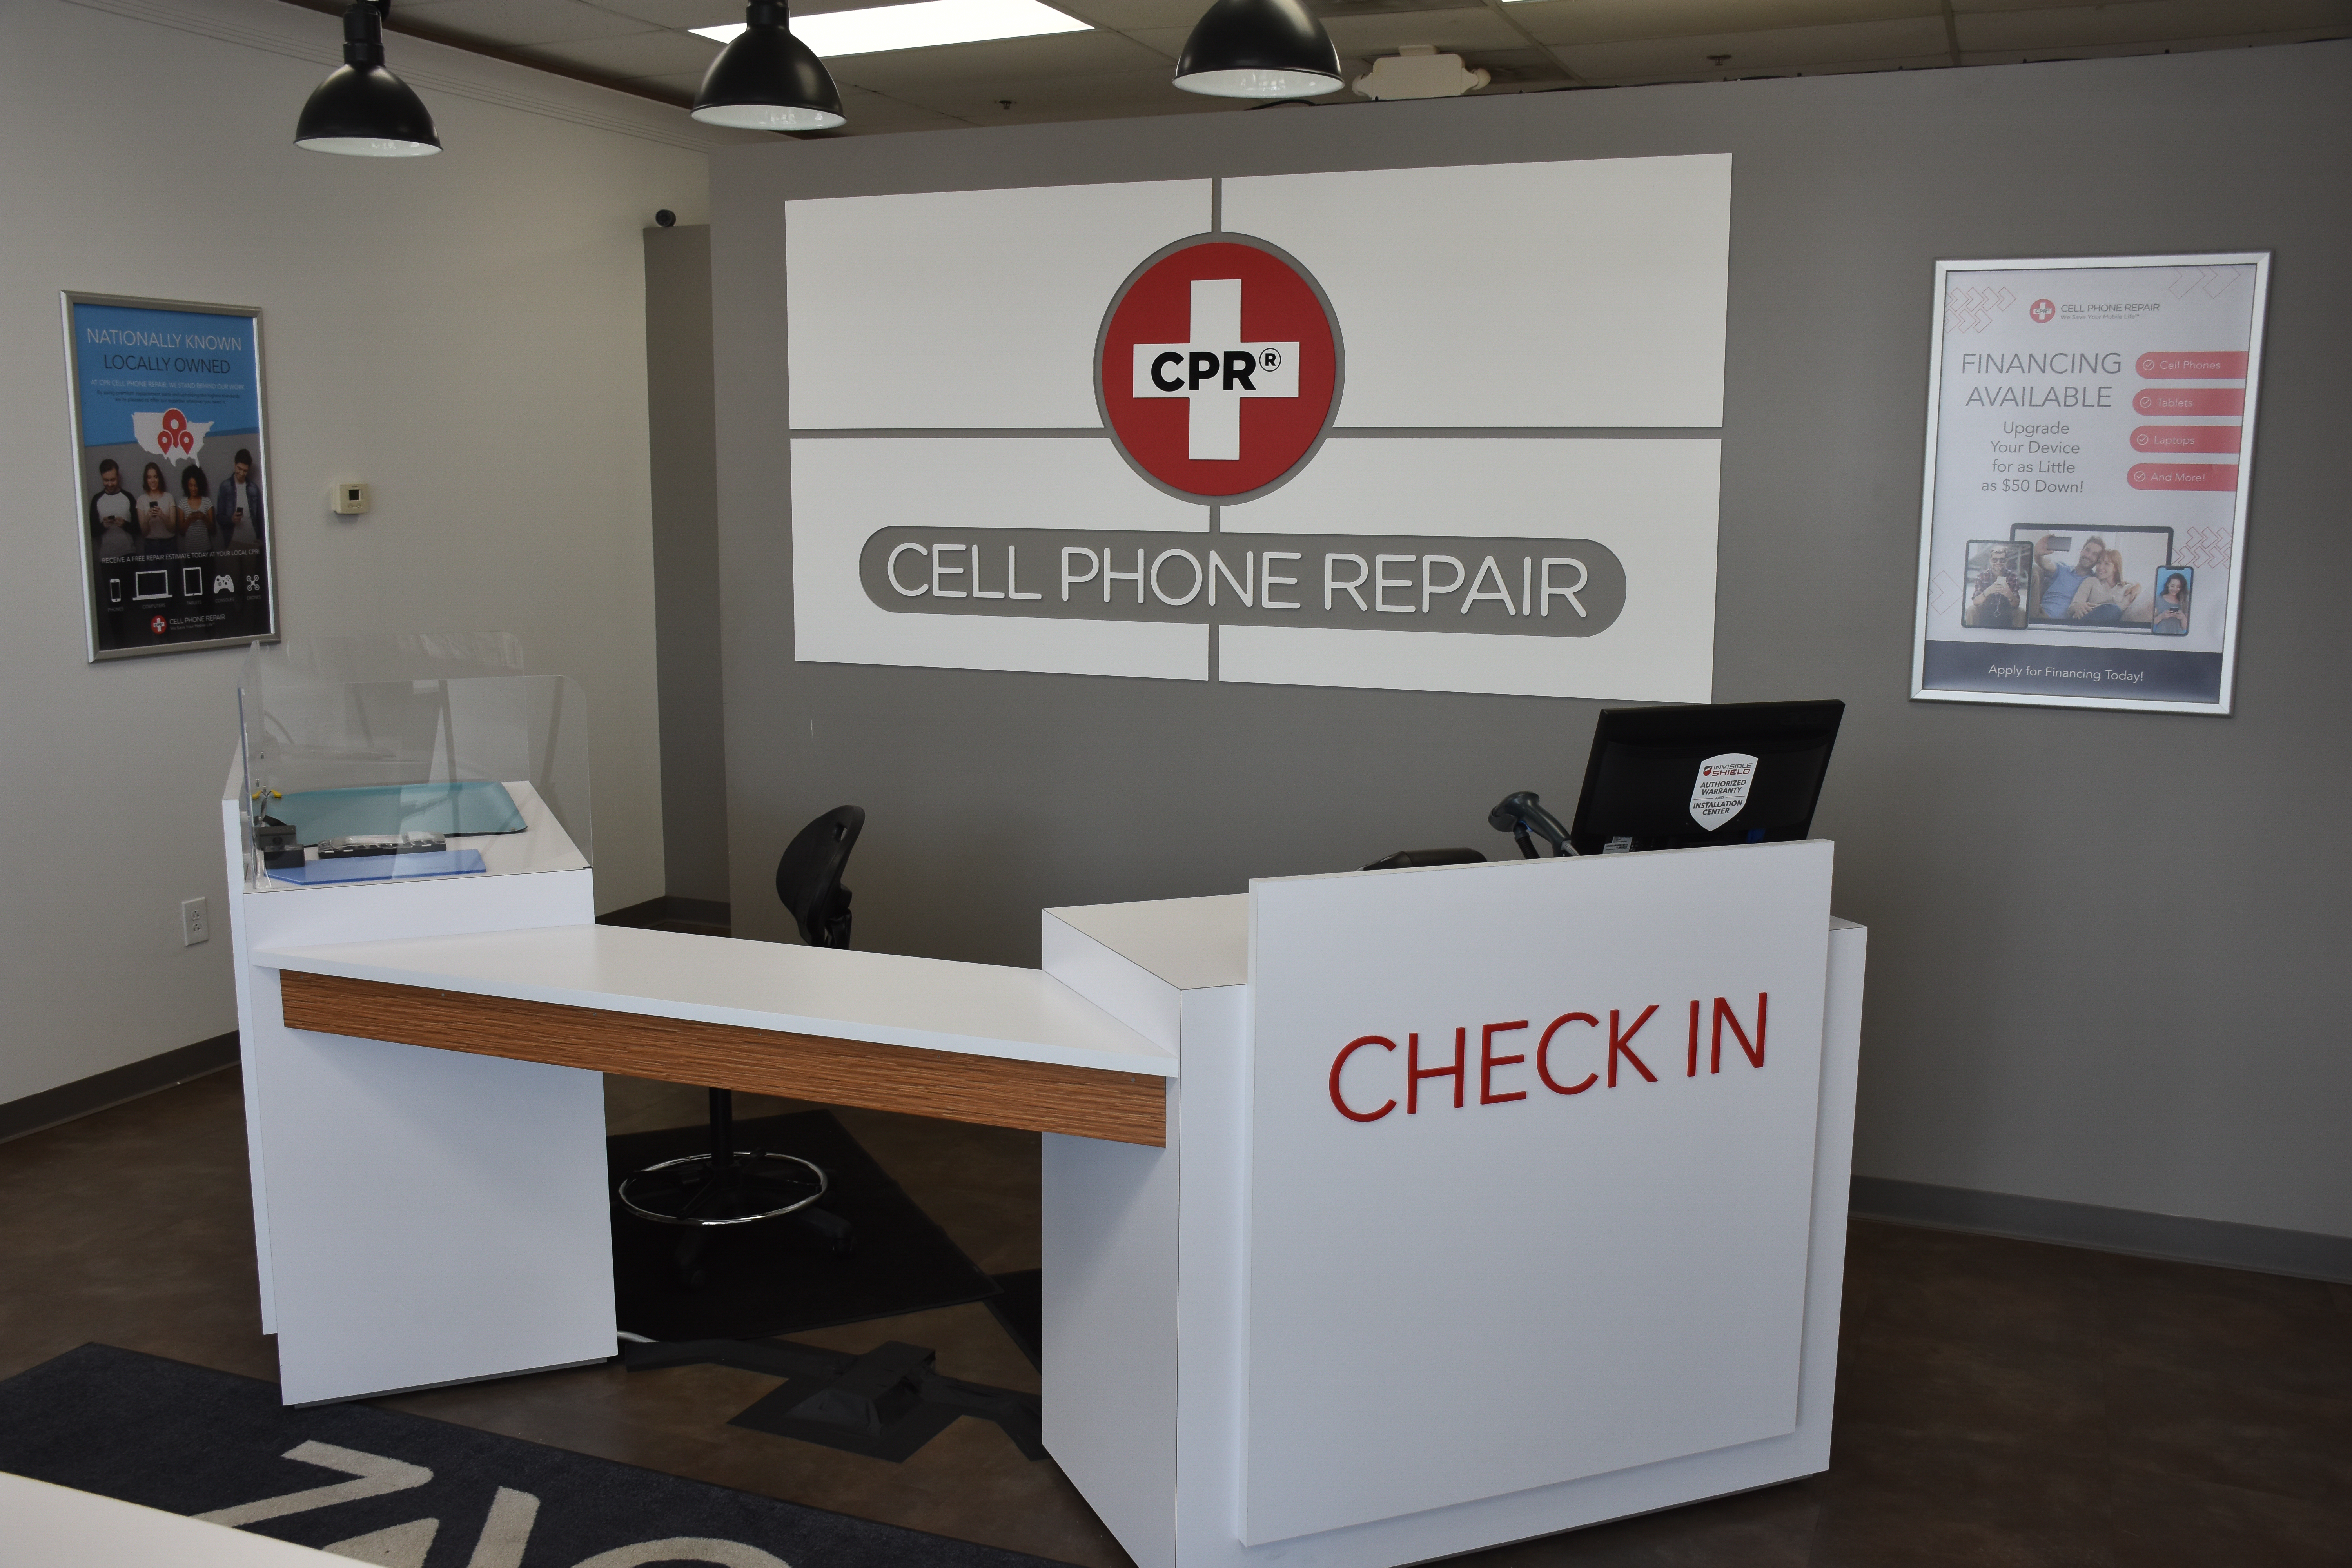 CPR Cell Phone Repair, Friday, April 16, 2021, Press release picture